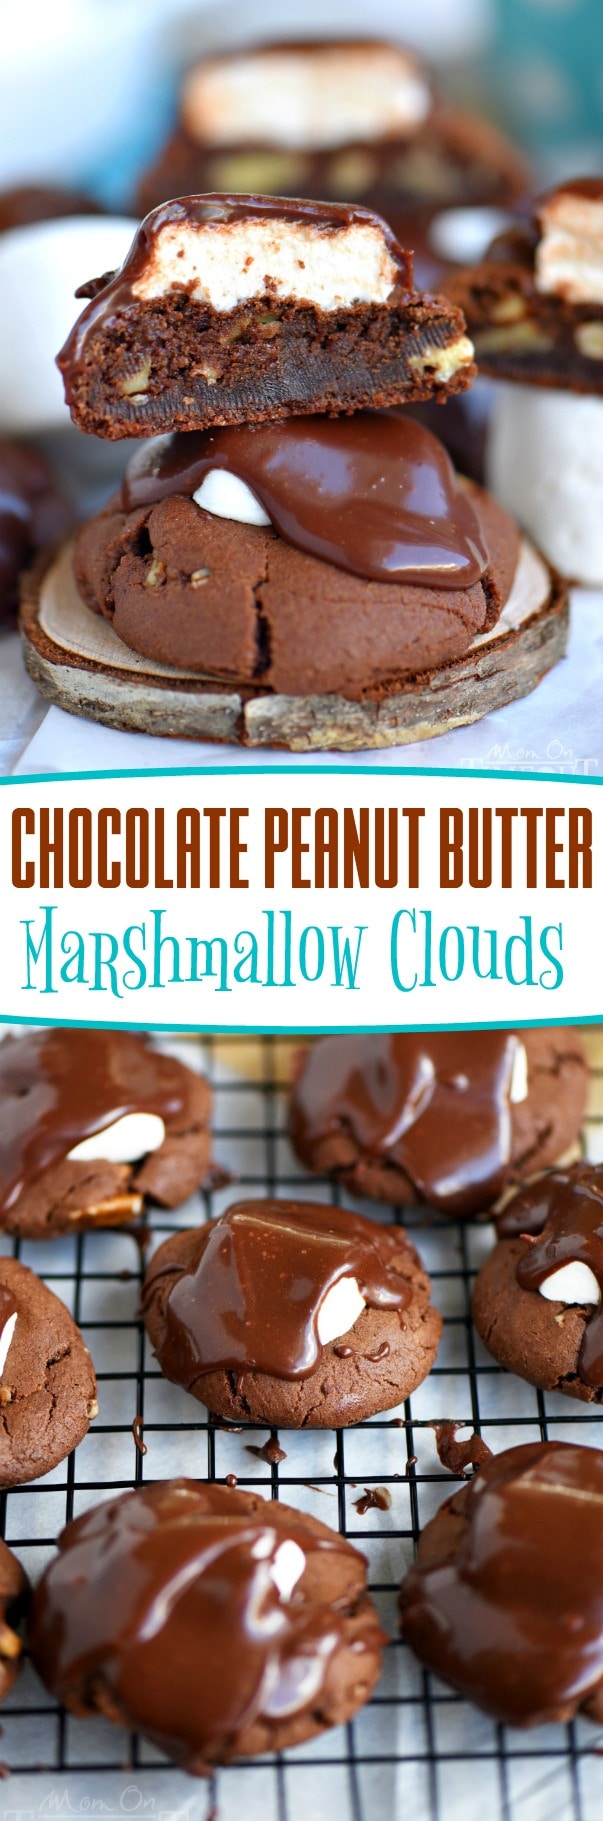 Today is the perfect day to indulge in these Chocolate Peanut Butter Marshmallow Clouds! The most incredible chocolate cookies you've ever had topped with a marshmallow cloud and decadent chocolate frosting! It's impossible to say no to these glorious treats! // Mom On Timeout